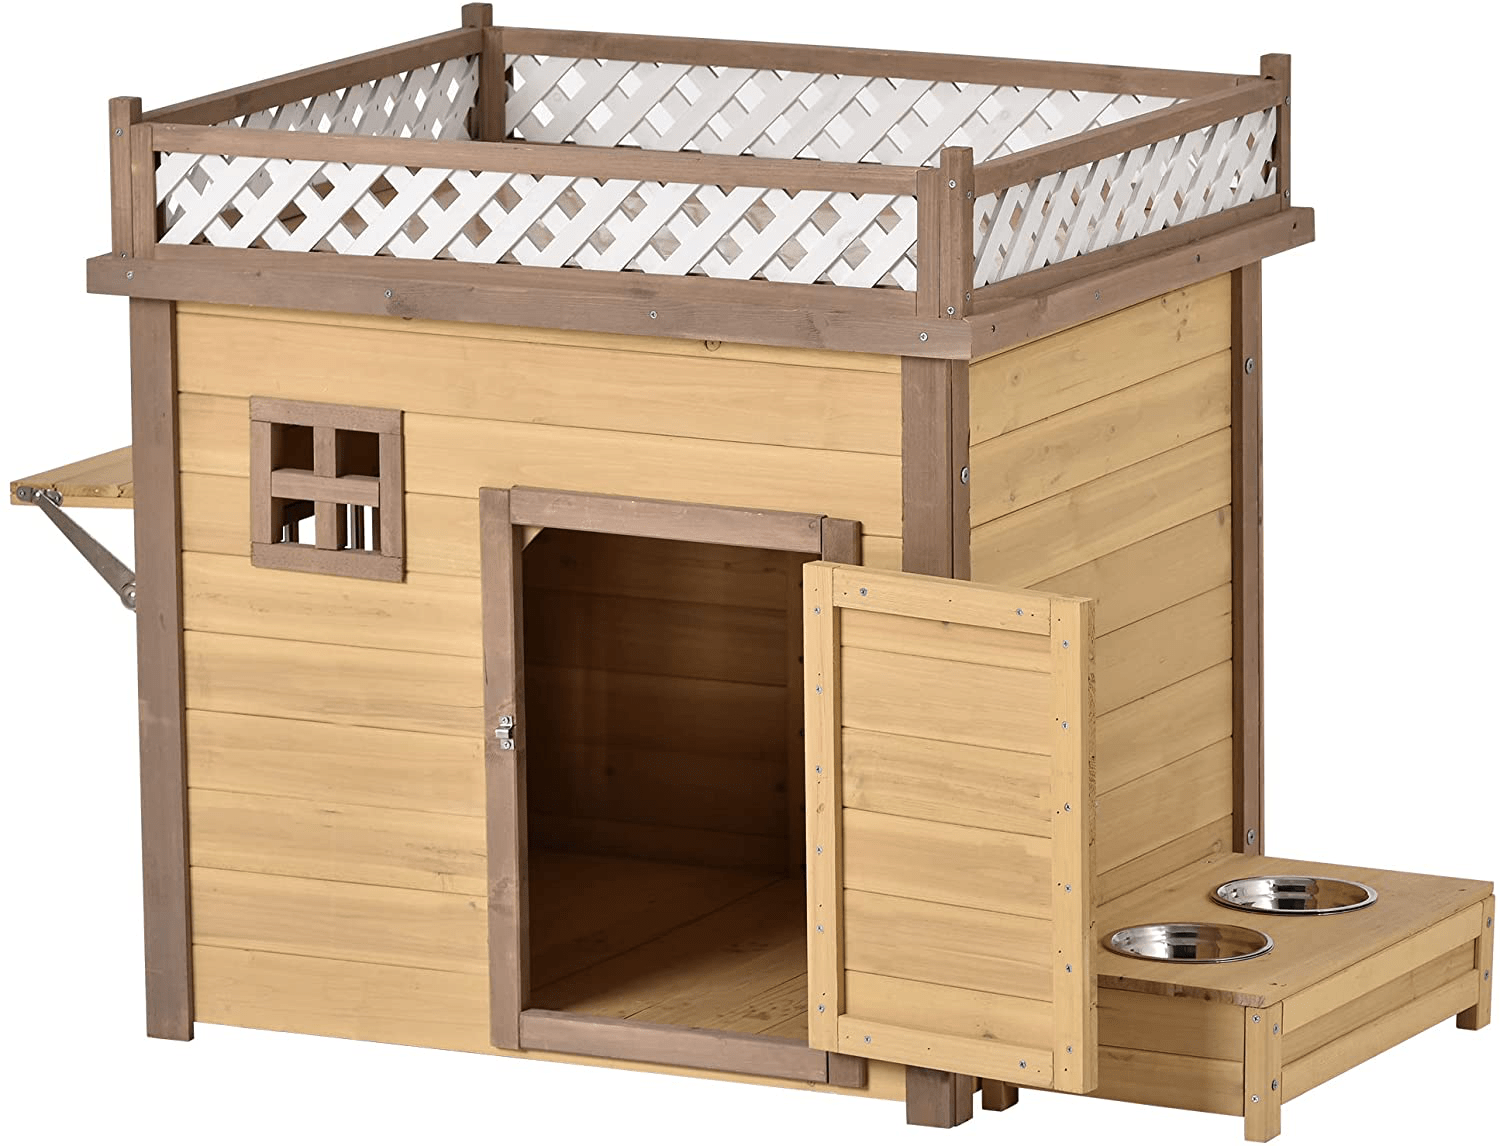 Wooden Dog House Cat Houses 31.5” Dog Crate Outdoor Insulated with Flower Stand, Plant Stand and Wood Feeder, Weather Resistant Weatherproof Pet Log Cabin